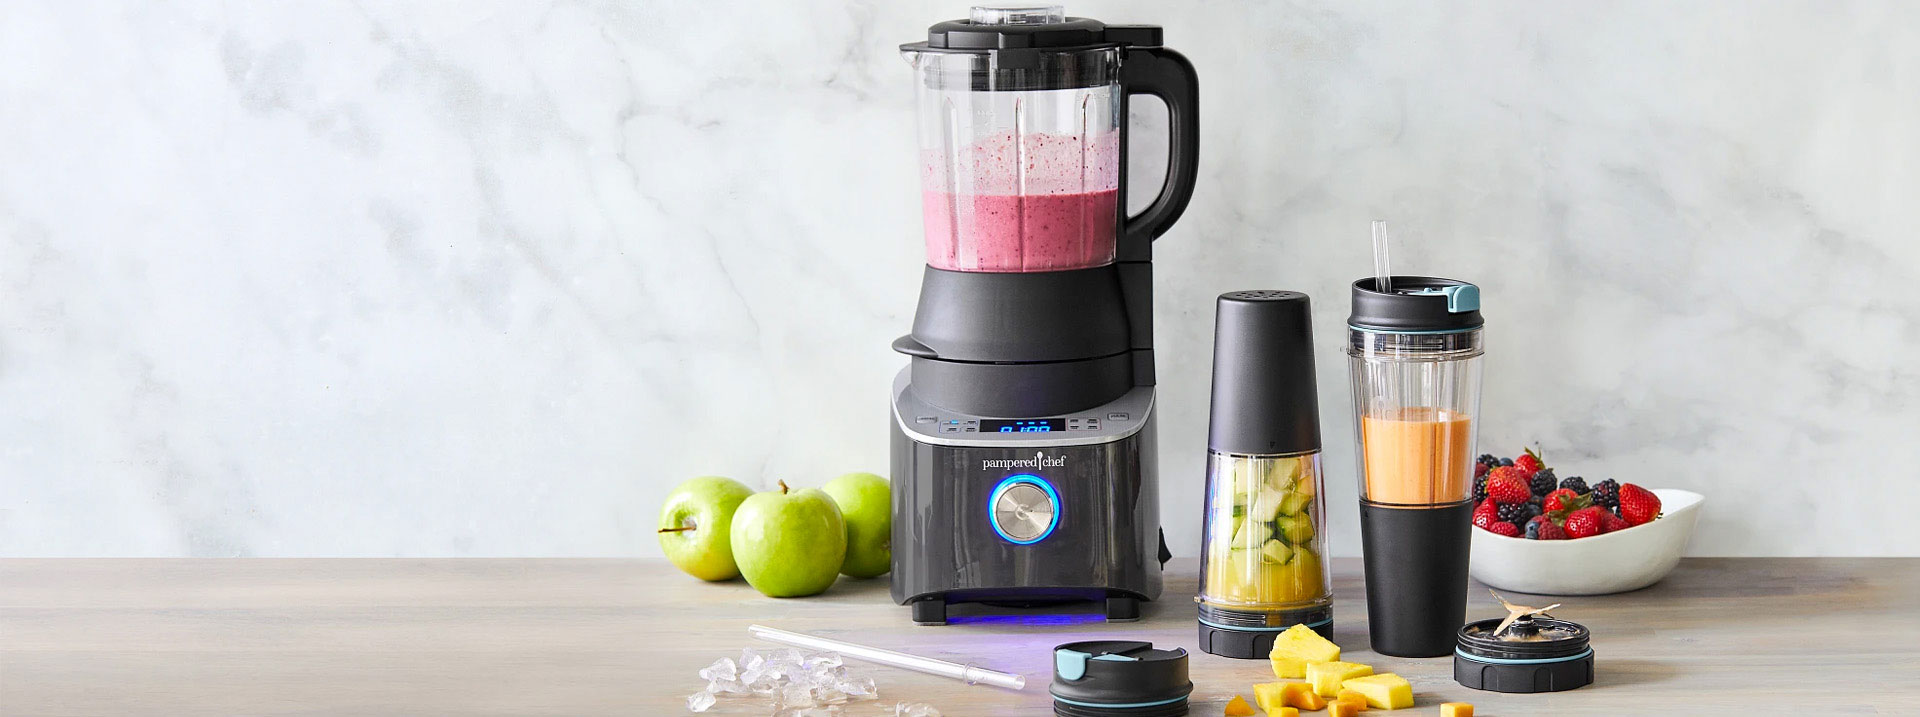 The Deluxe Cooking Blender and Smoothie Cup & Adapter making fruit smoothies